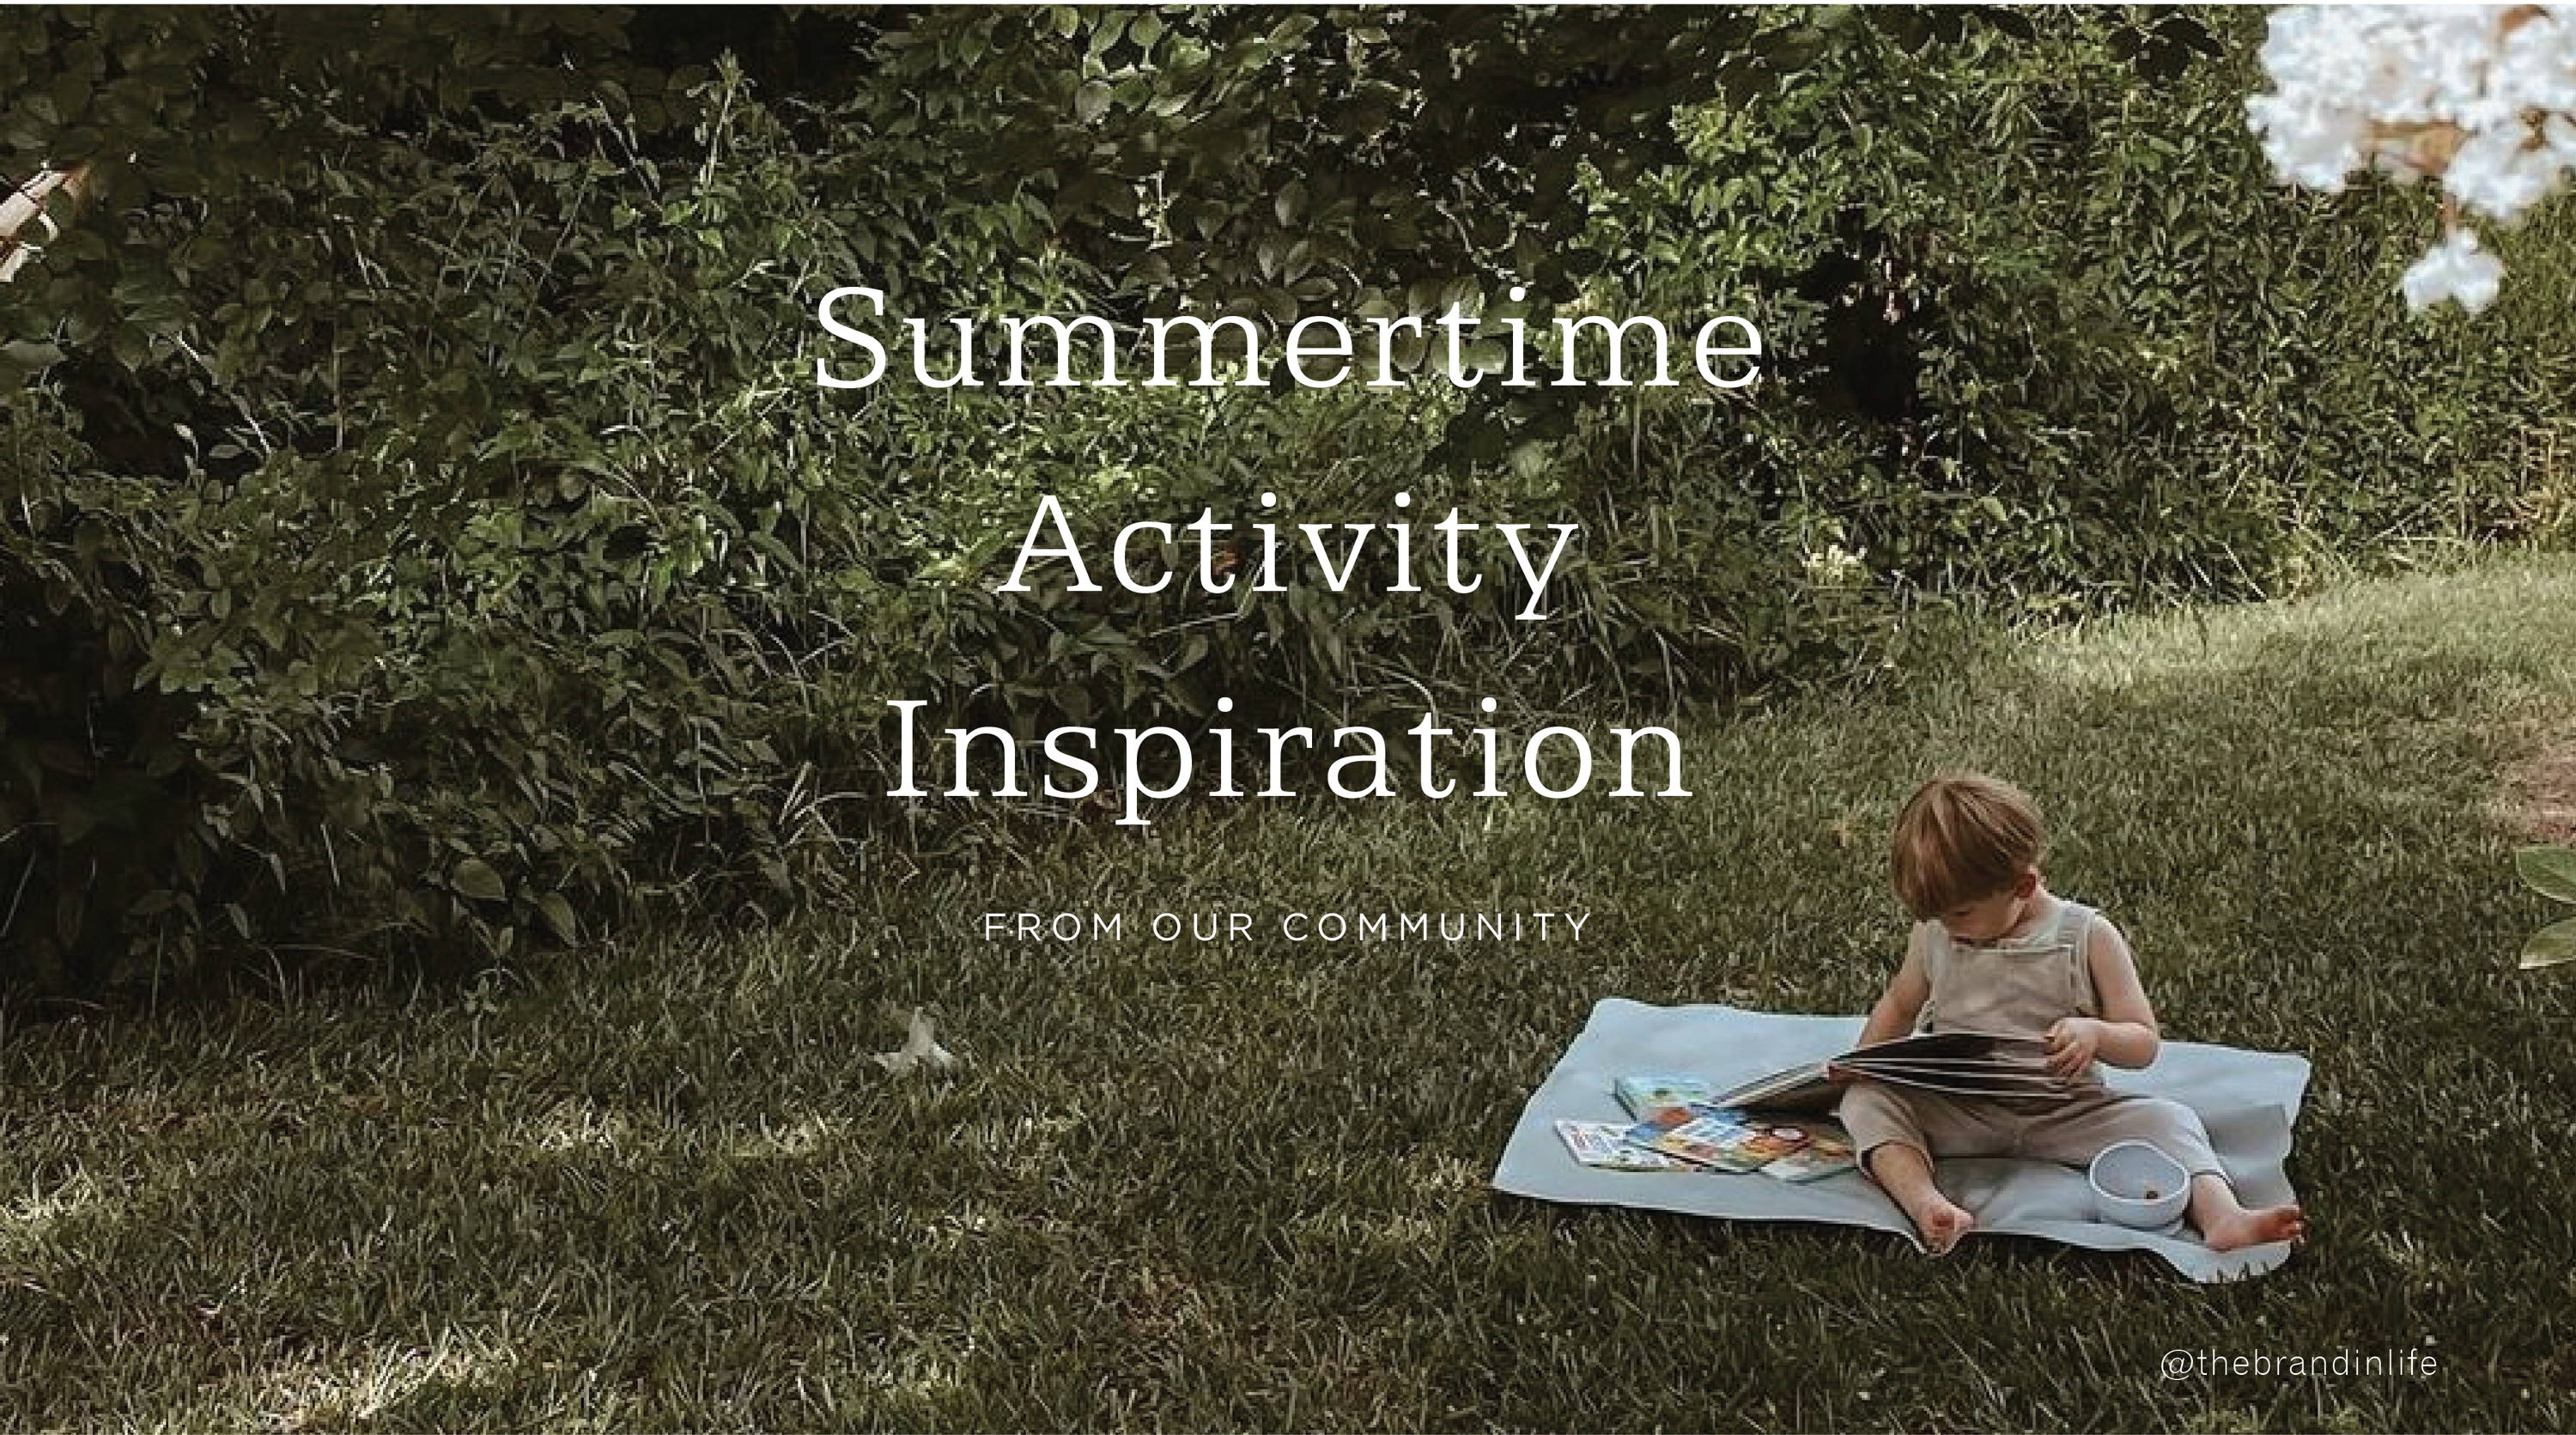 Summertime Activity Inspiration from our community